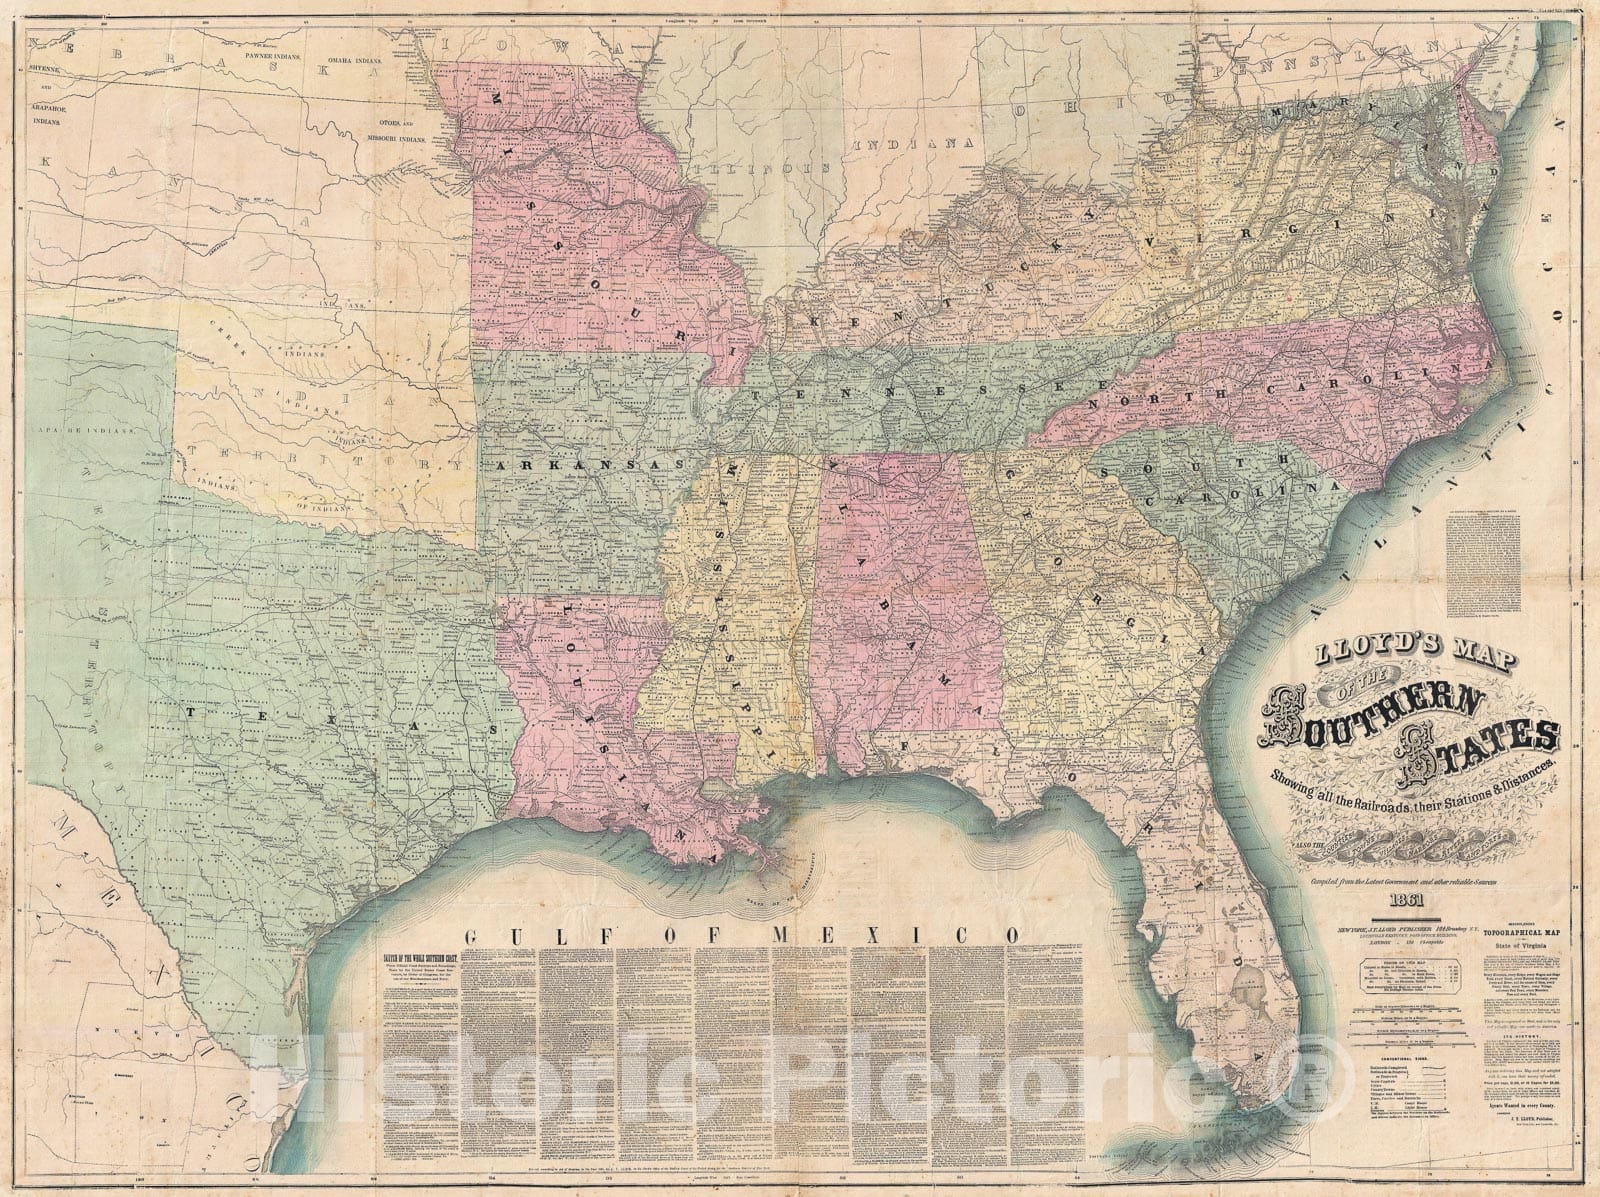 Historic Map : Lloyd's Map of The Southen States or Confederacy, 1861, Vintage Wall Art